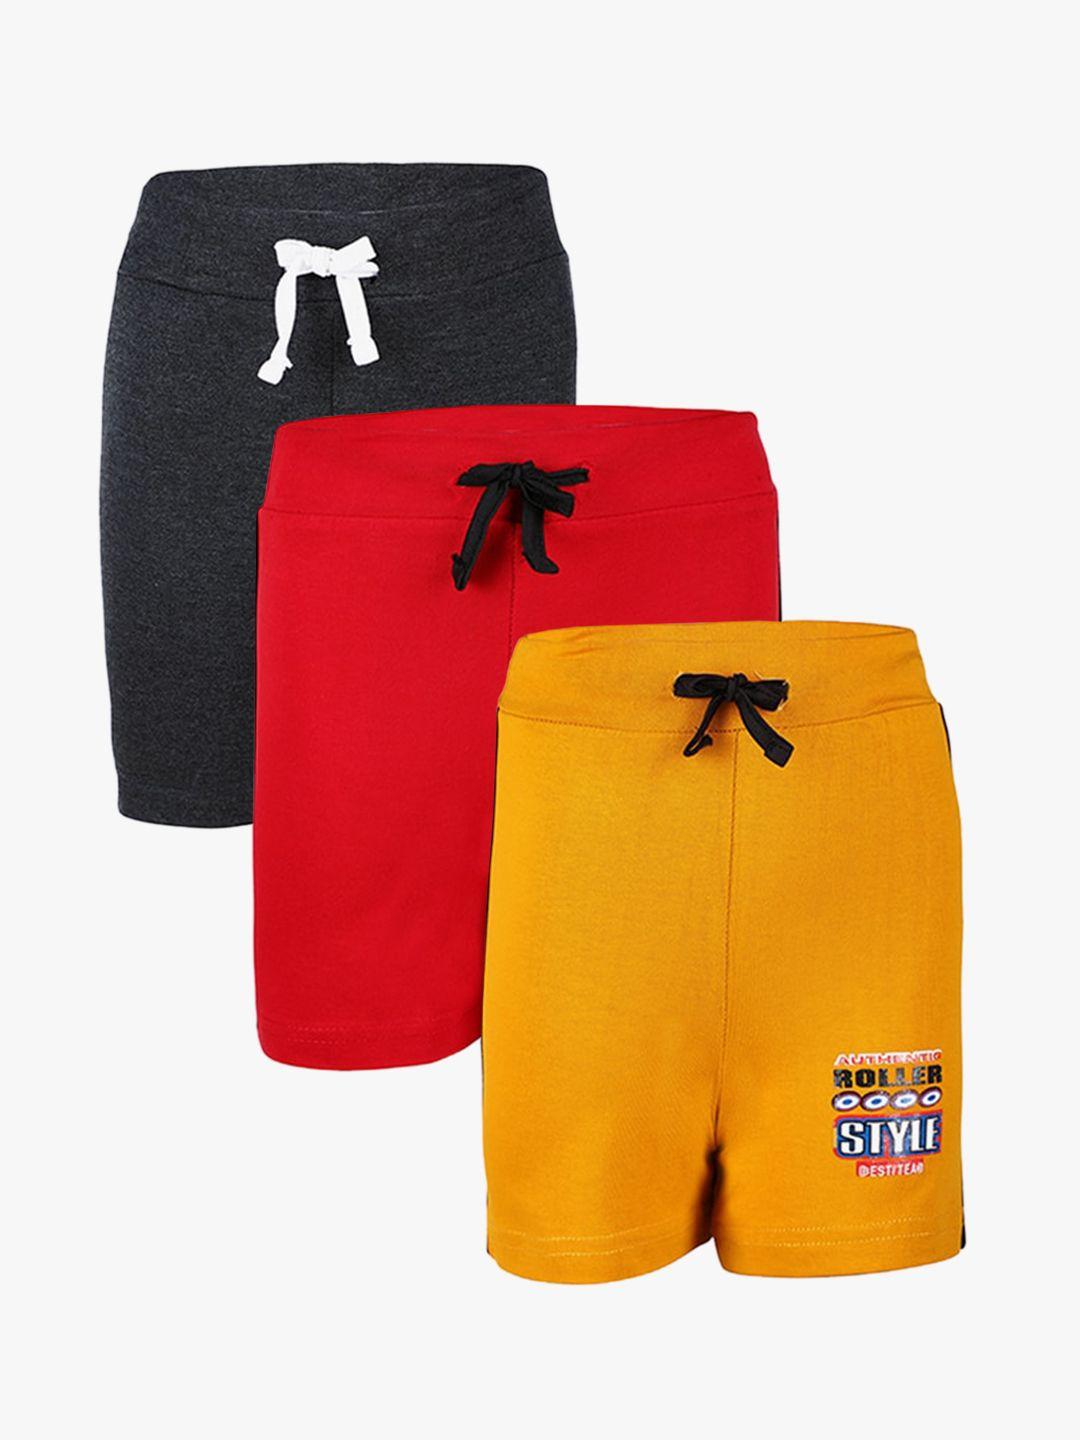 savage boys pack of 3 pure cotton shorts